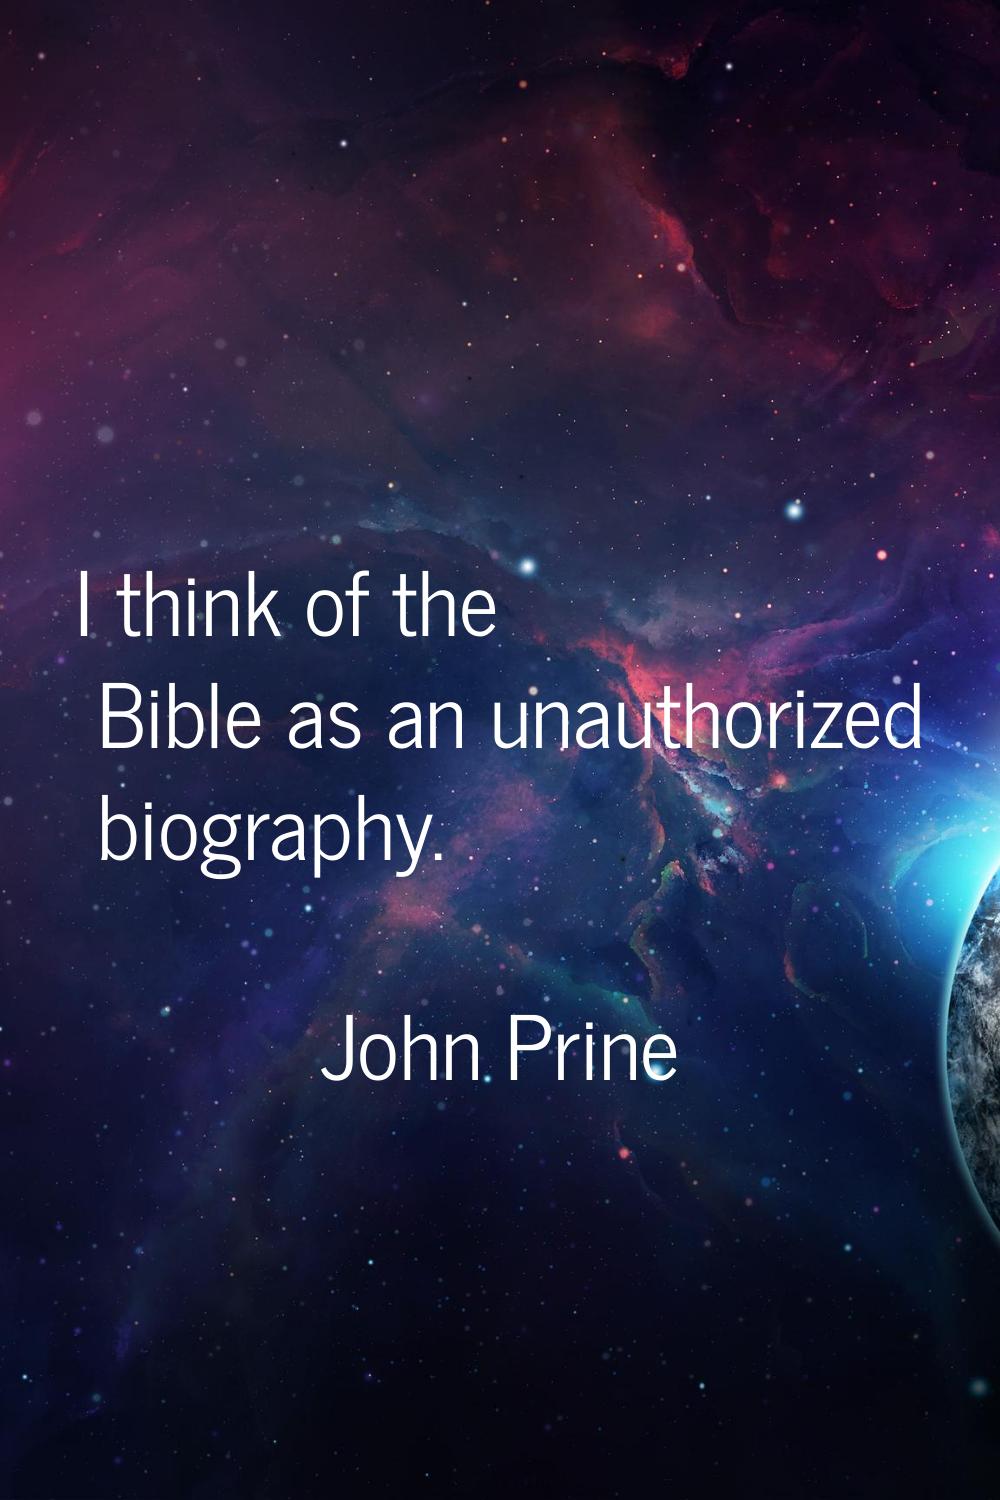 I think of the Bible as an unauthorized biography.